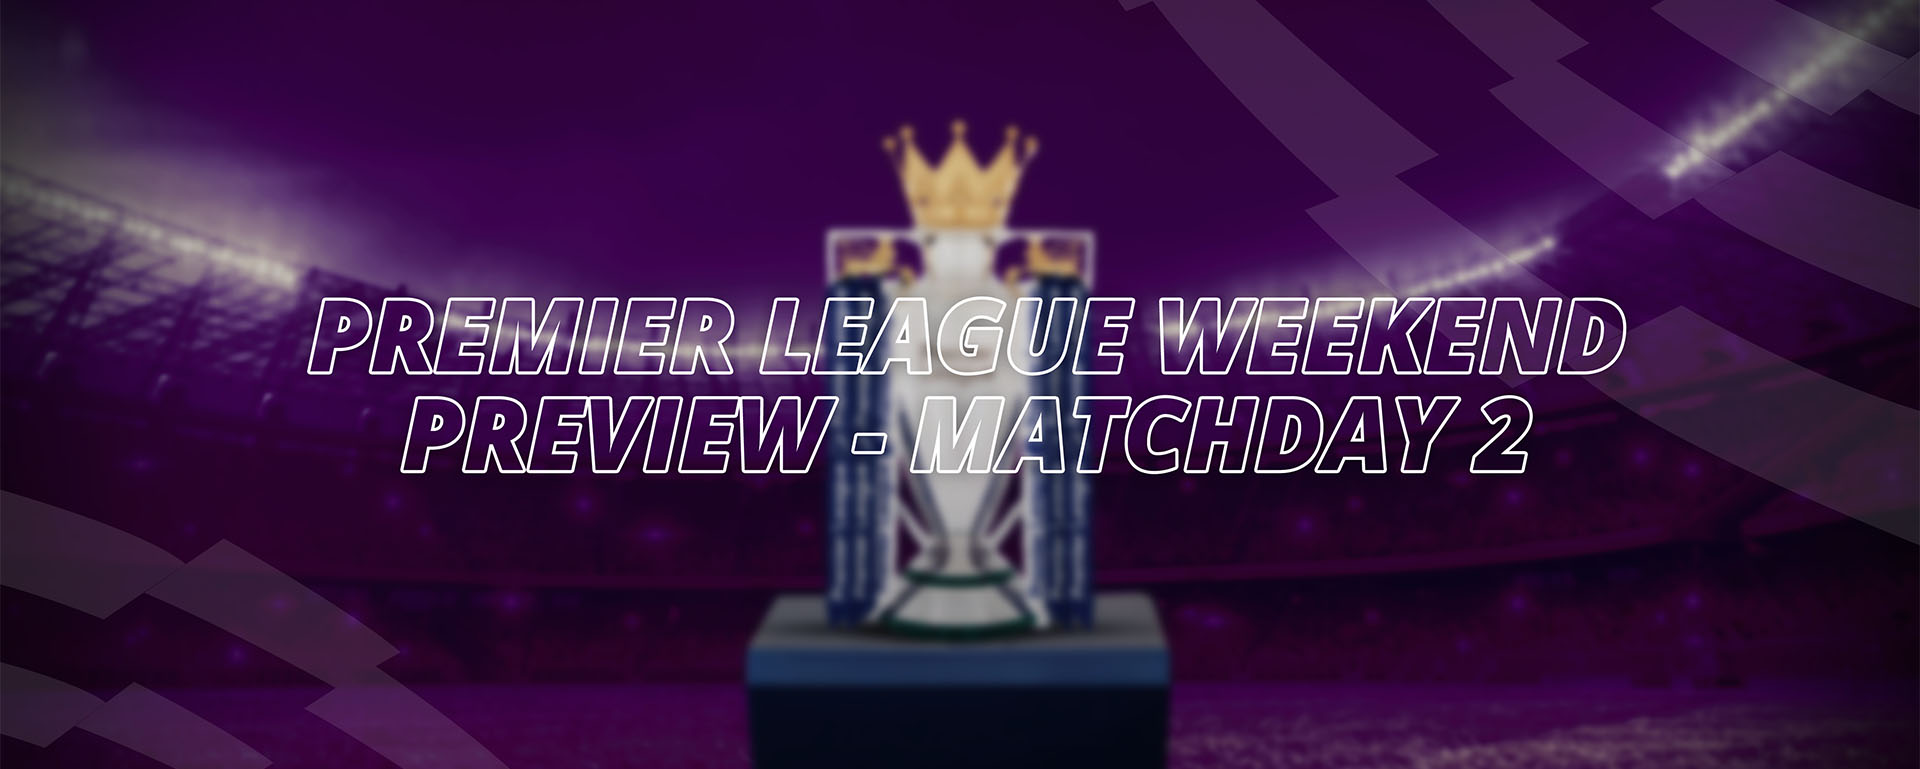 PREMIER LEAGUE WEEKEND PREVIEW – MATCHDAY 2